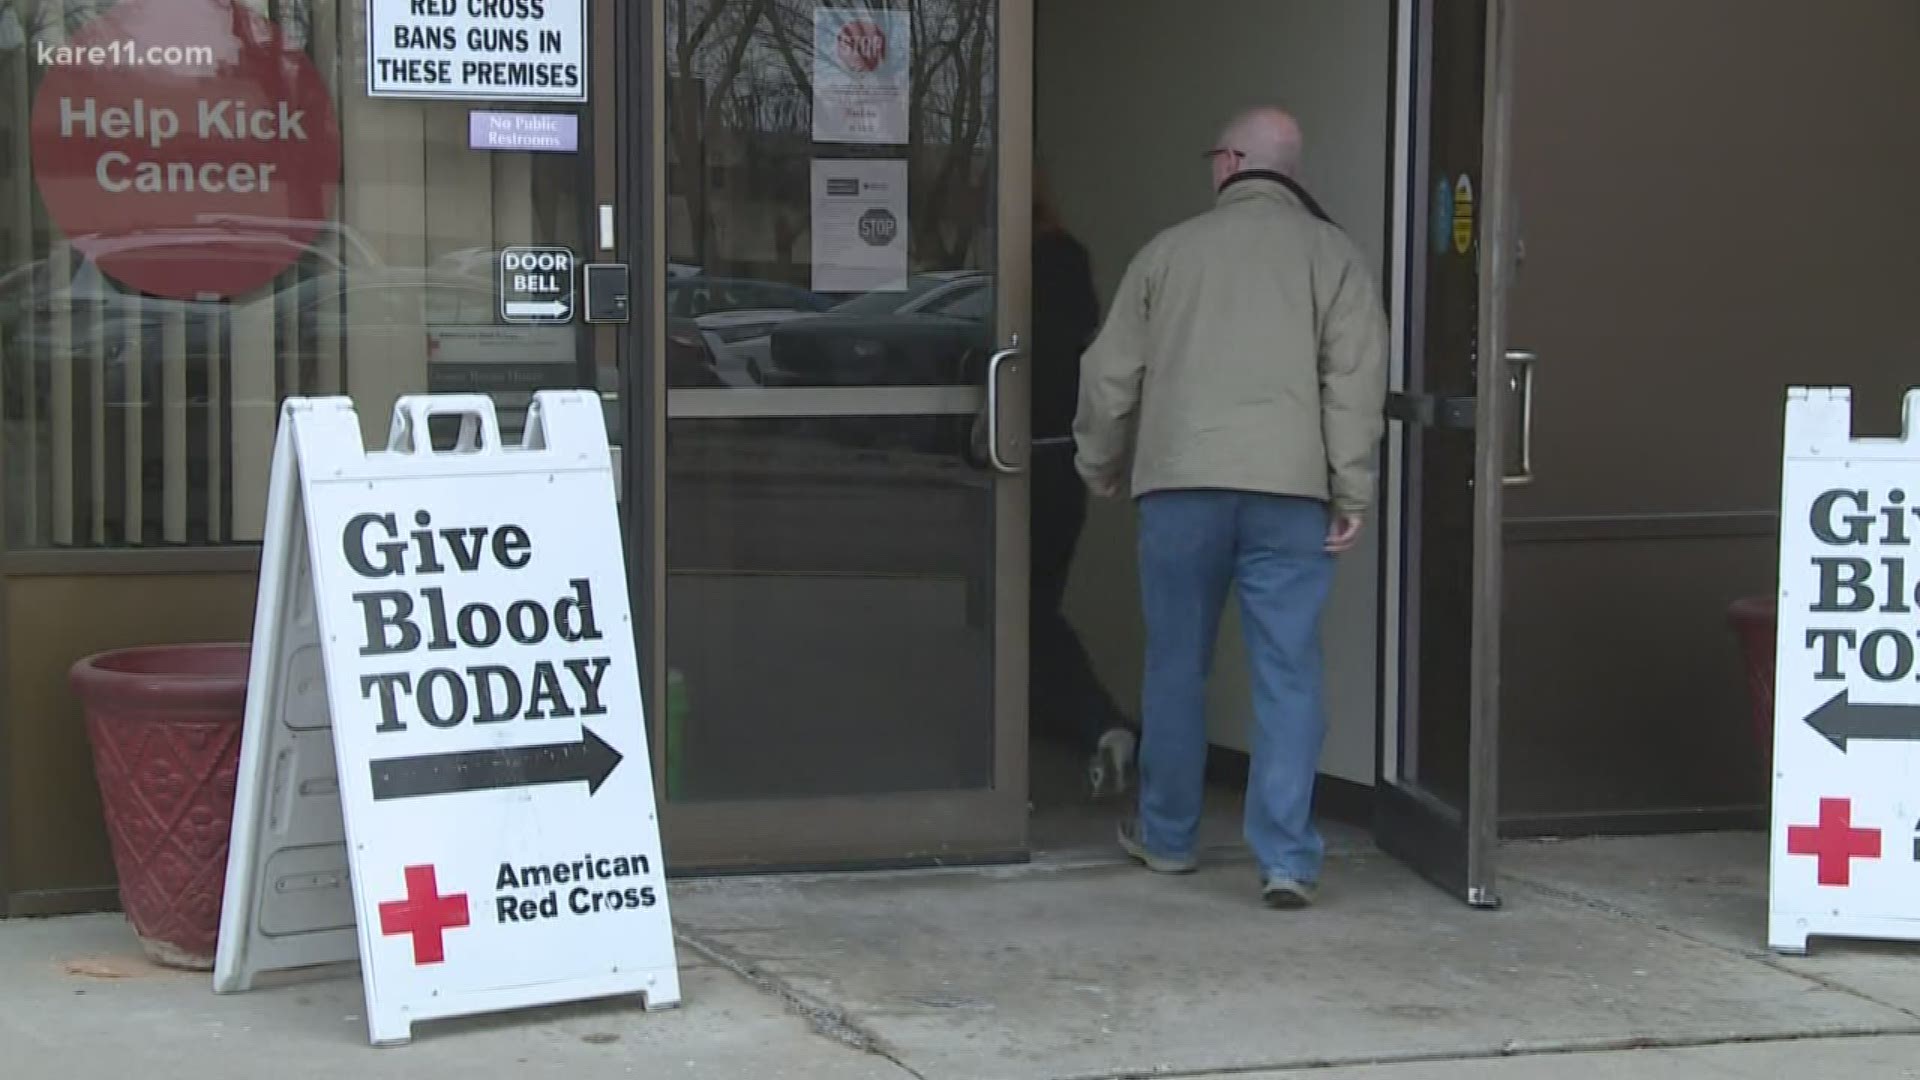 Thousands of blood drives have been cancelled due to the COVID-19 pandemic, but Minnesotans are still stepping up to help.